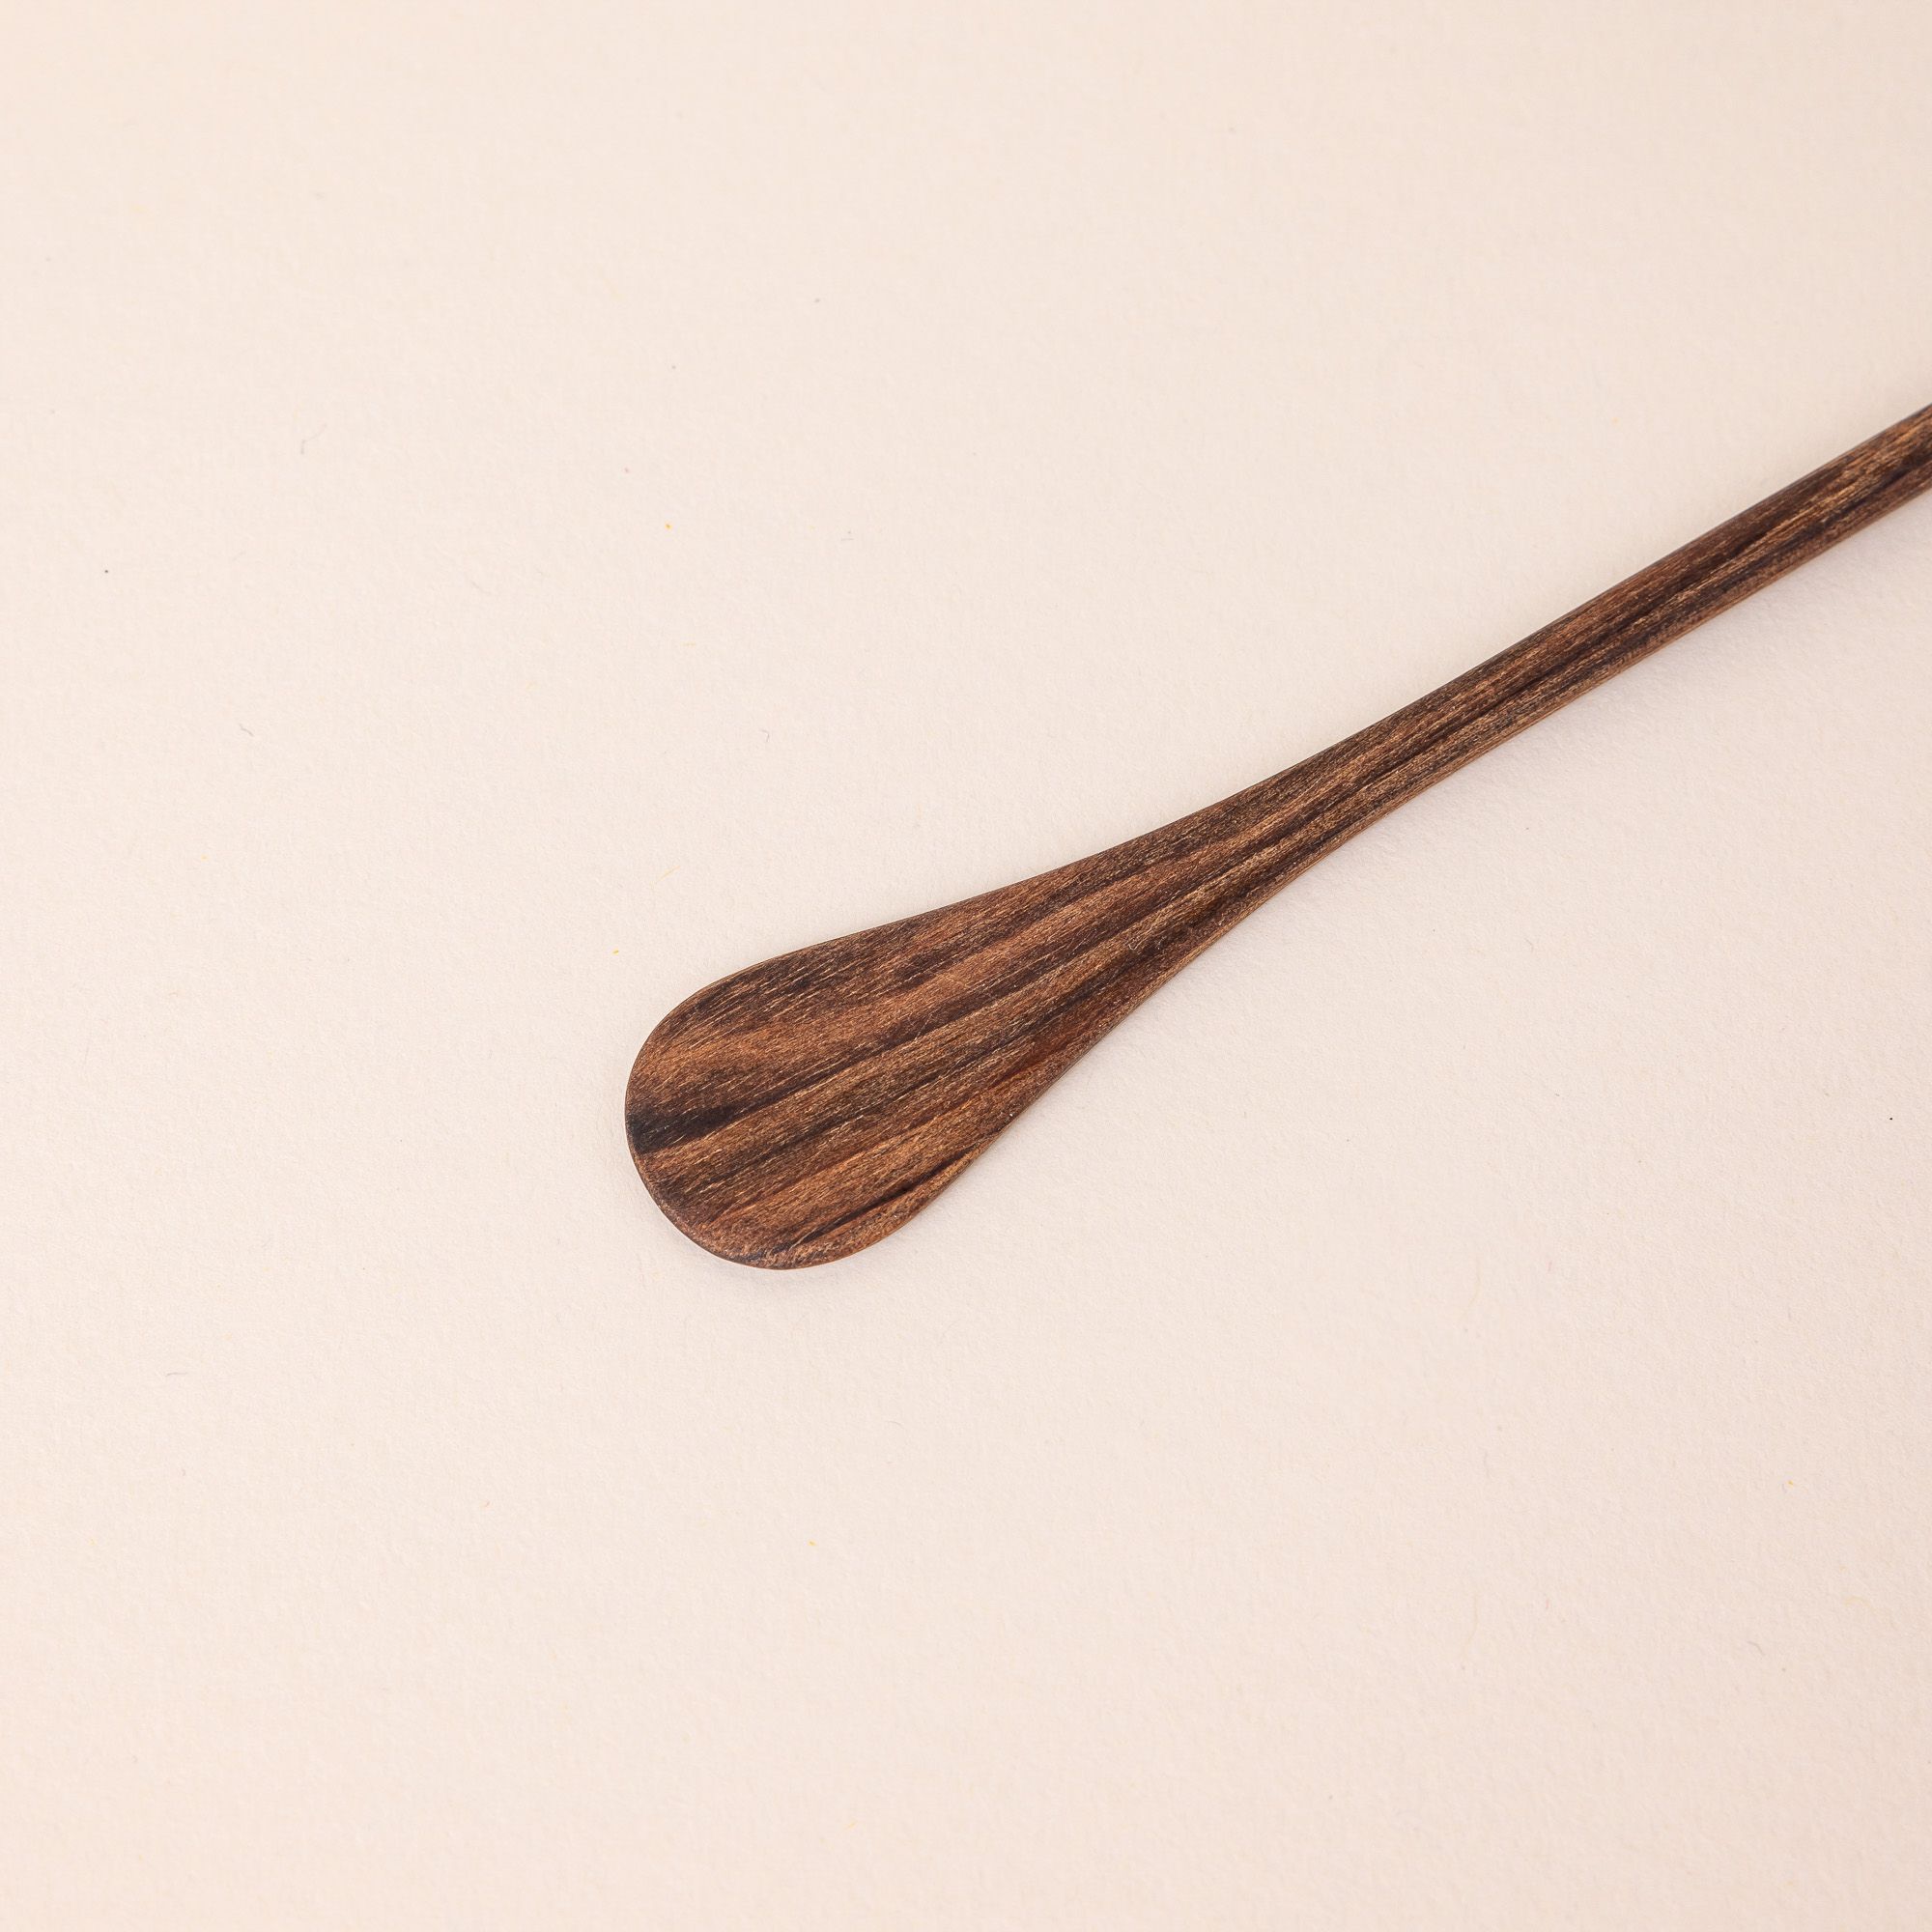 A close up of the end of a walnut cocktail stirrer. The end has a small spoon-like shape.